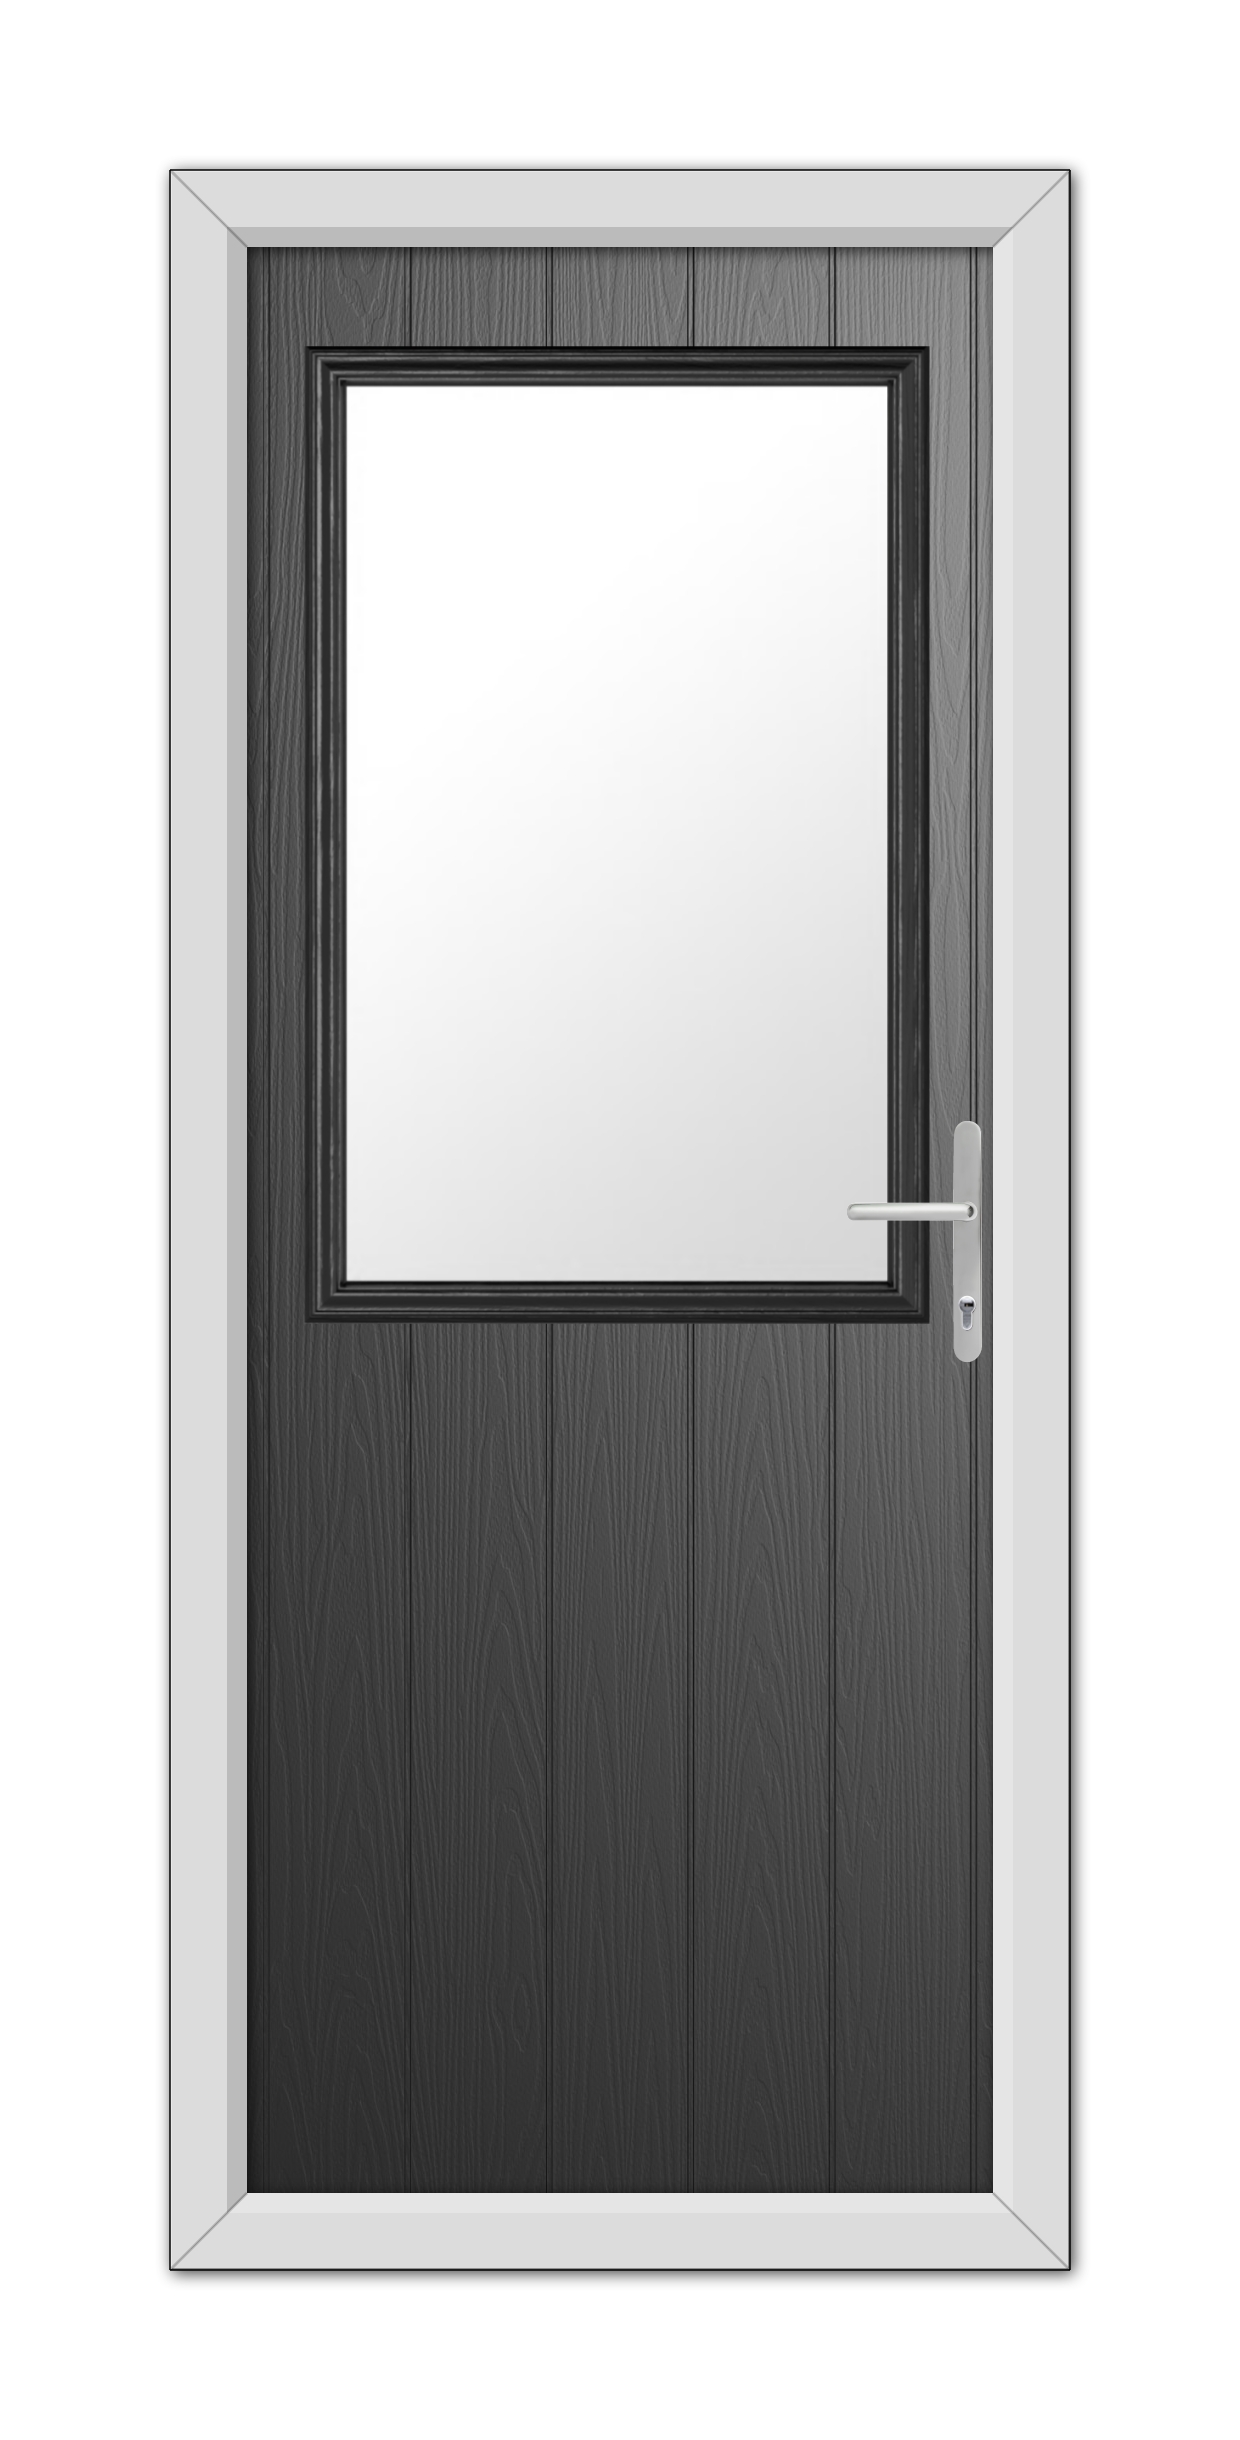 Modern Black Clifton Composite Door 48mm Timber Core with a window, fitted in a white frame, featuring a sleek metal handle on the right.